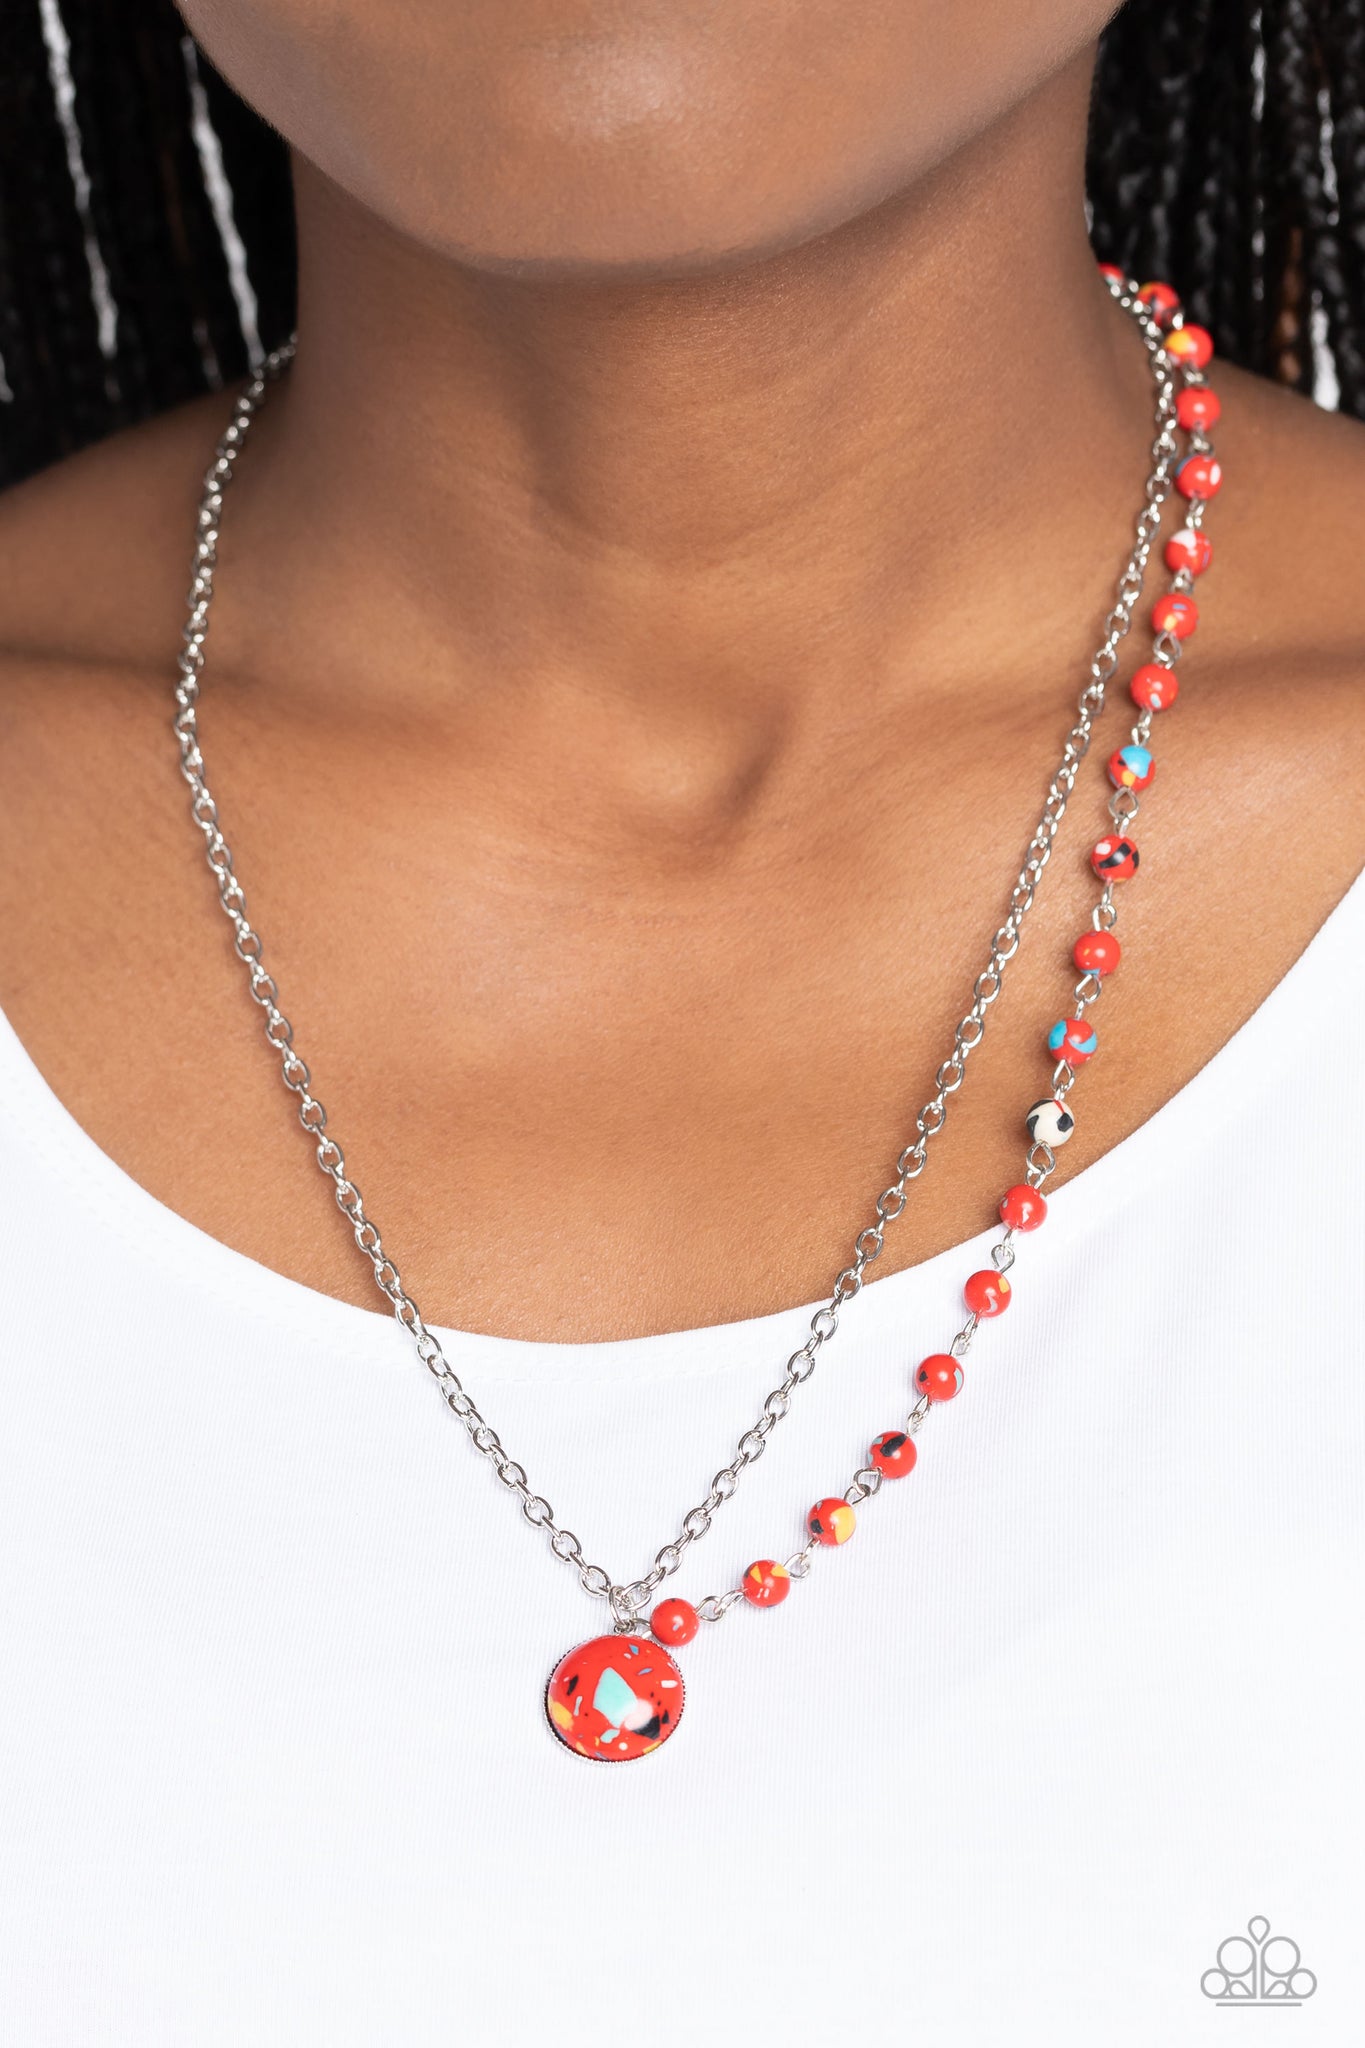 Paparazzi Accessories Walk This Broadway- Red Necklace – Bling by JessieK